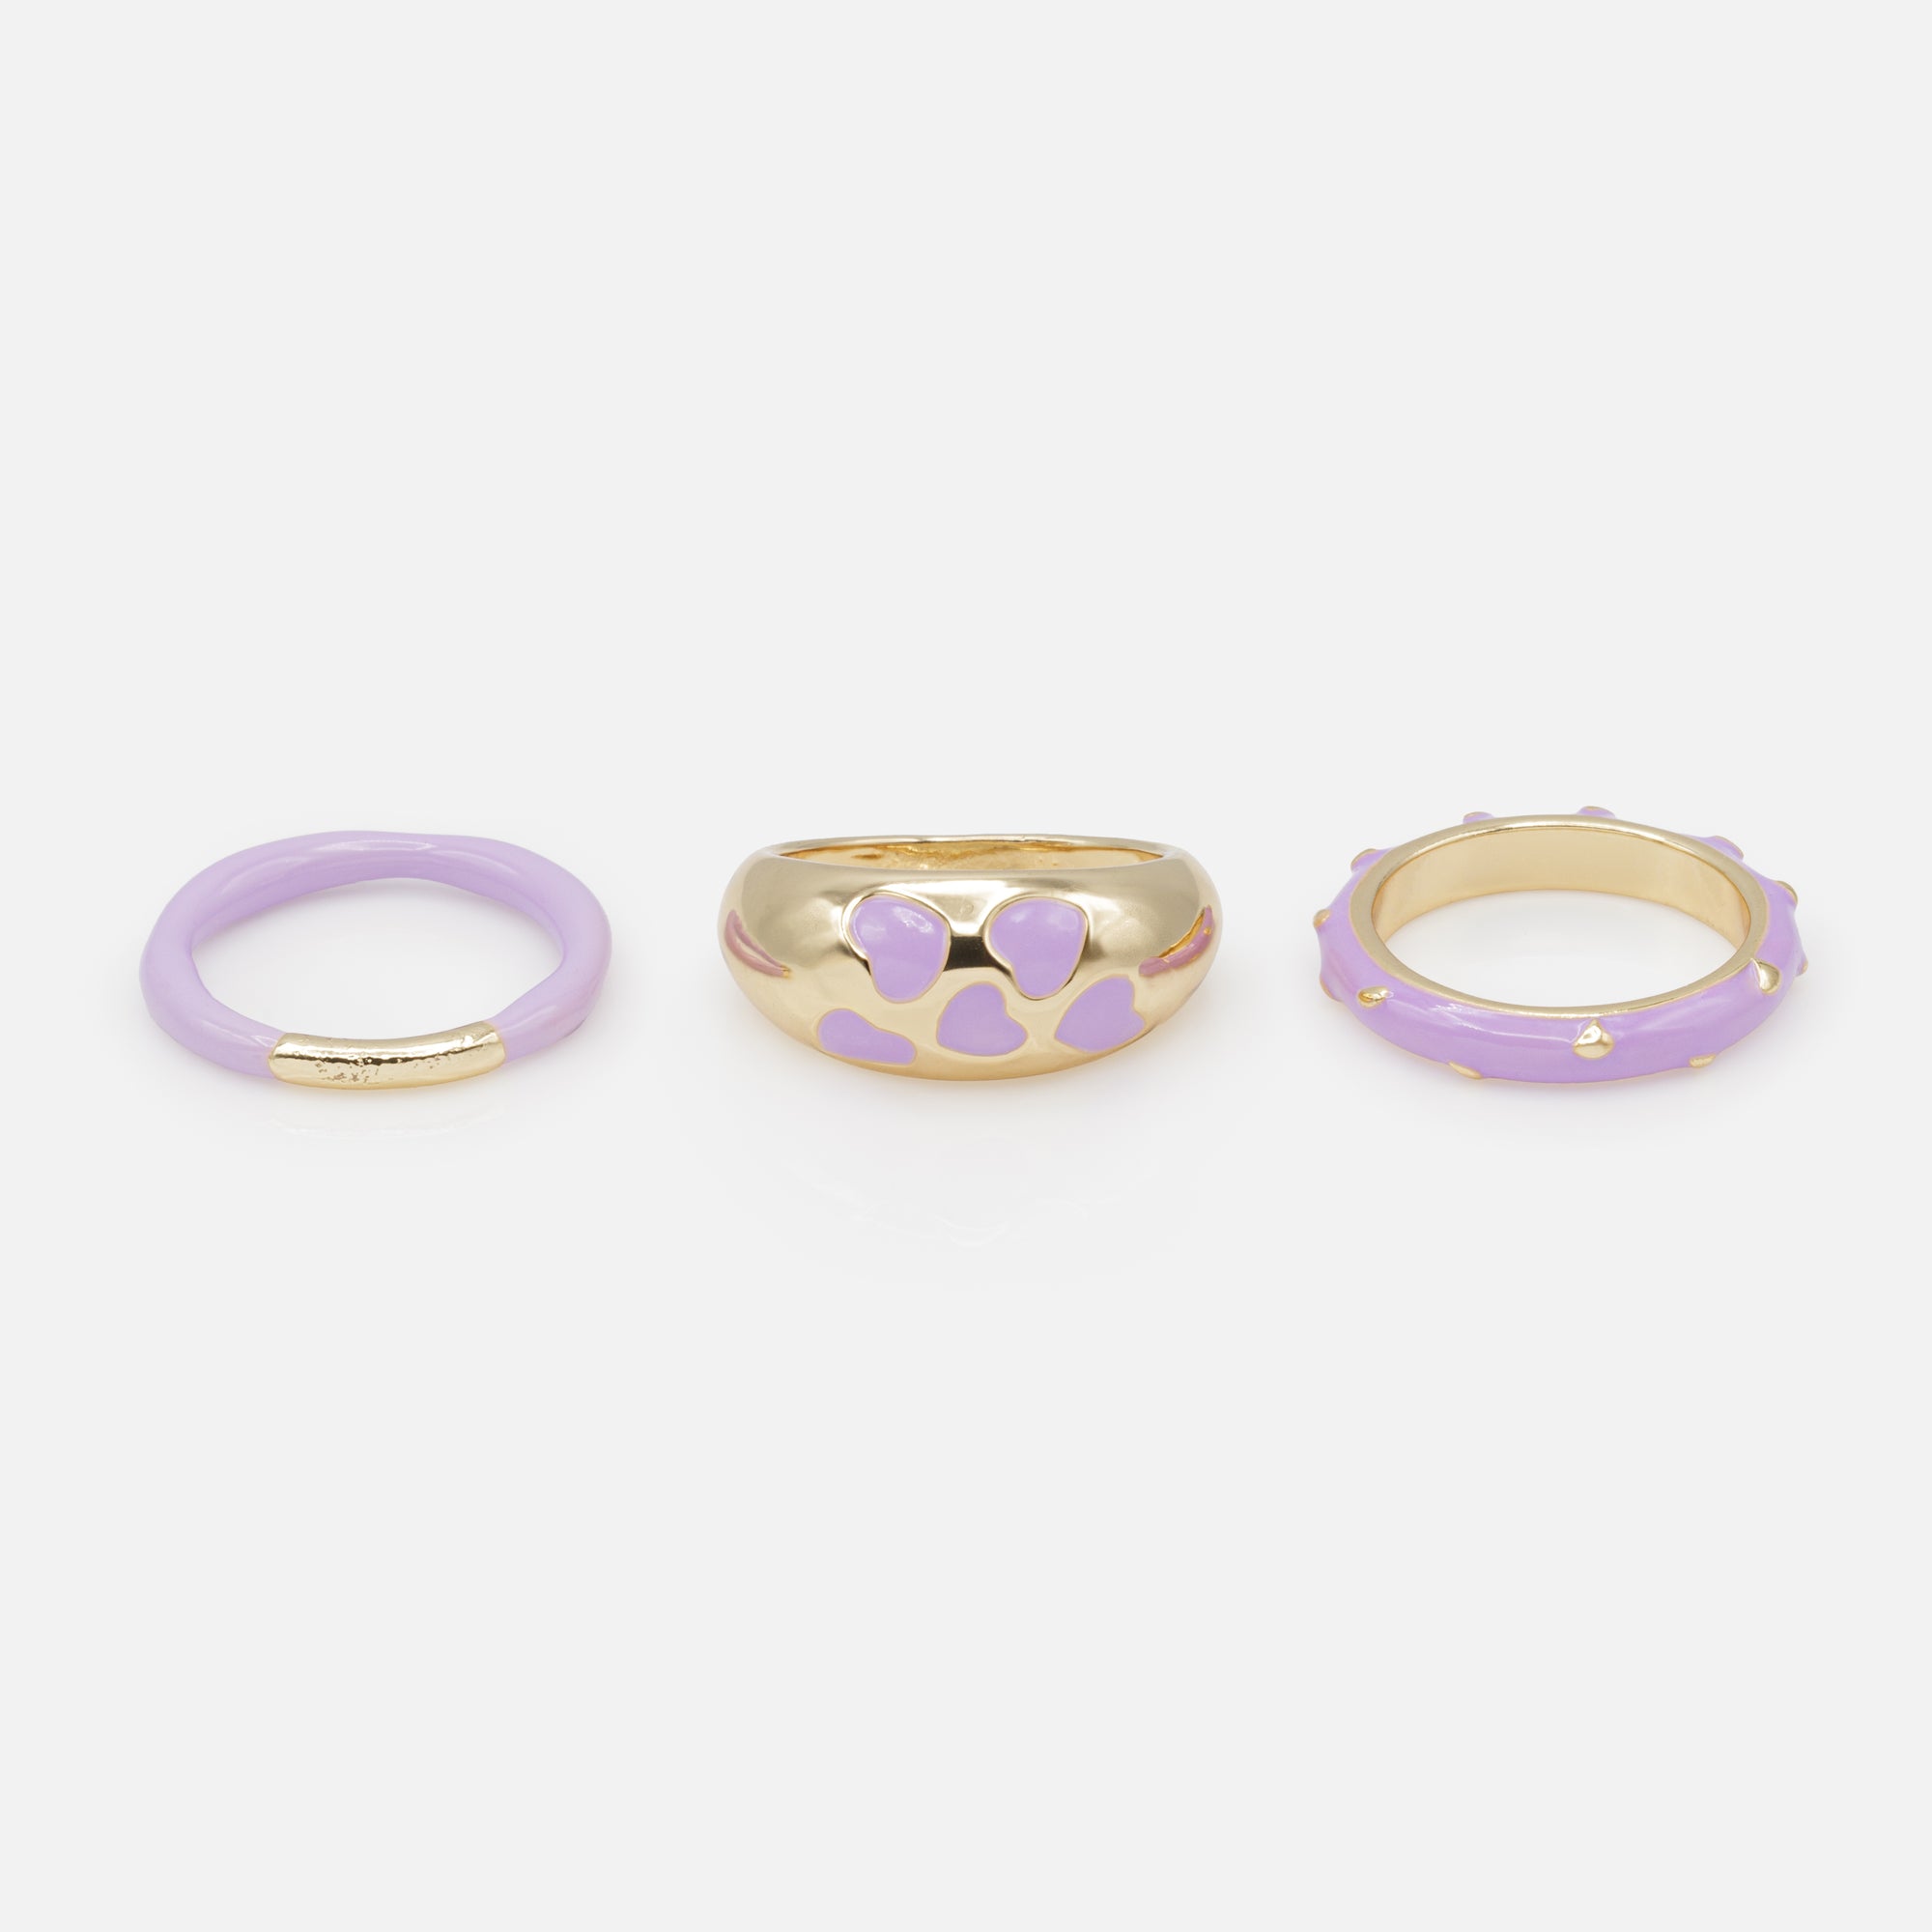 Set of three gold and lilac rings